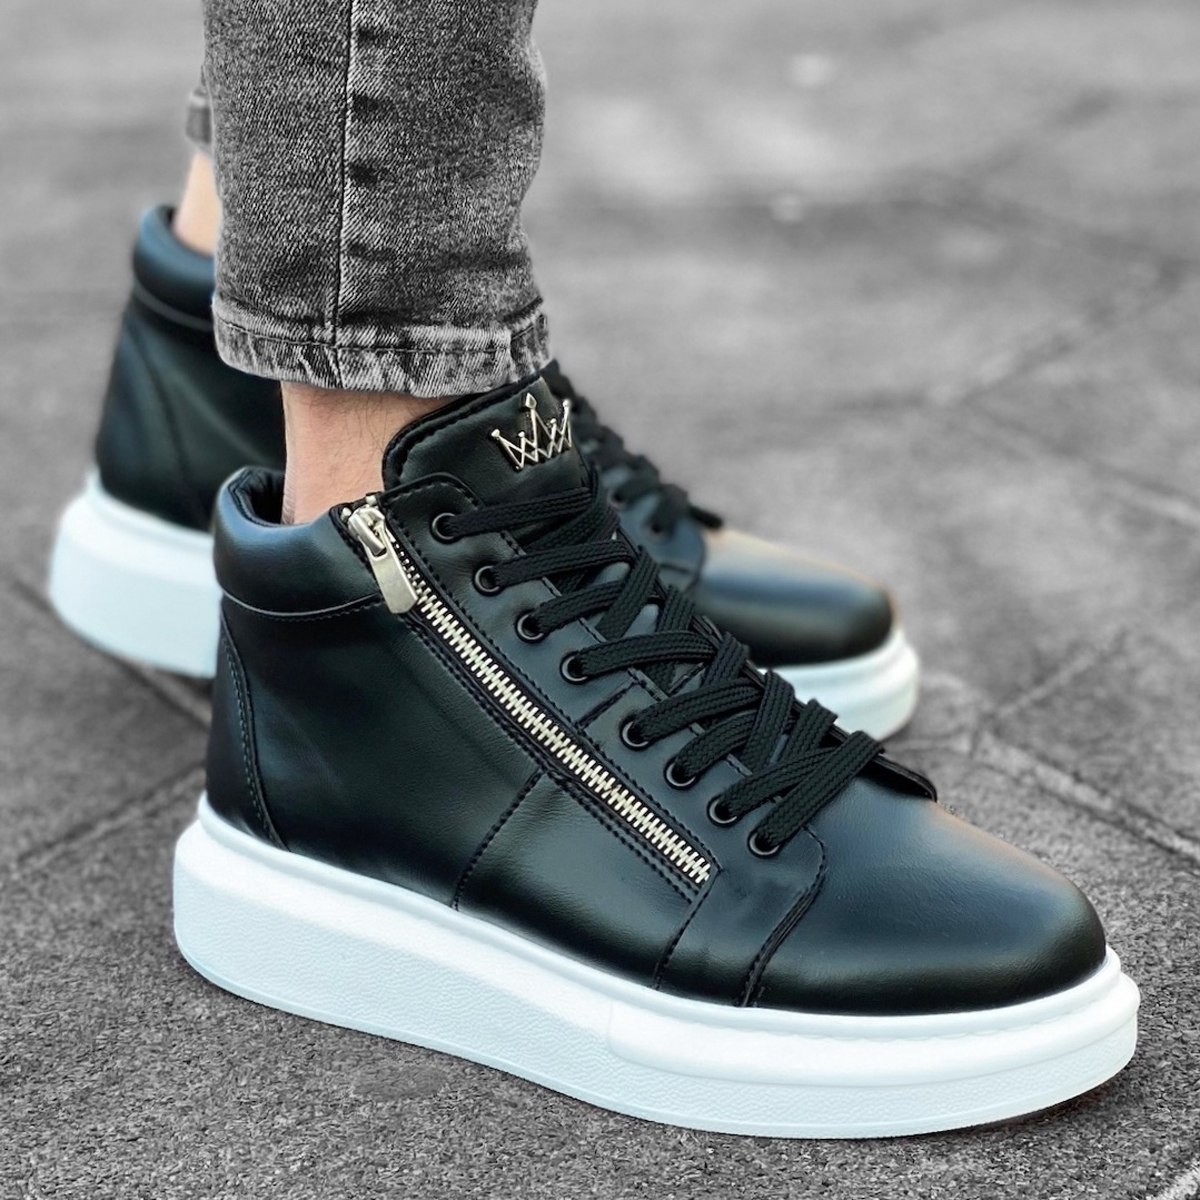 Hype Sole Zipped Style High Top Sneakers in Black - 1